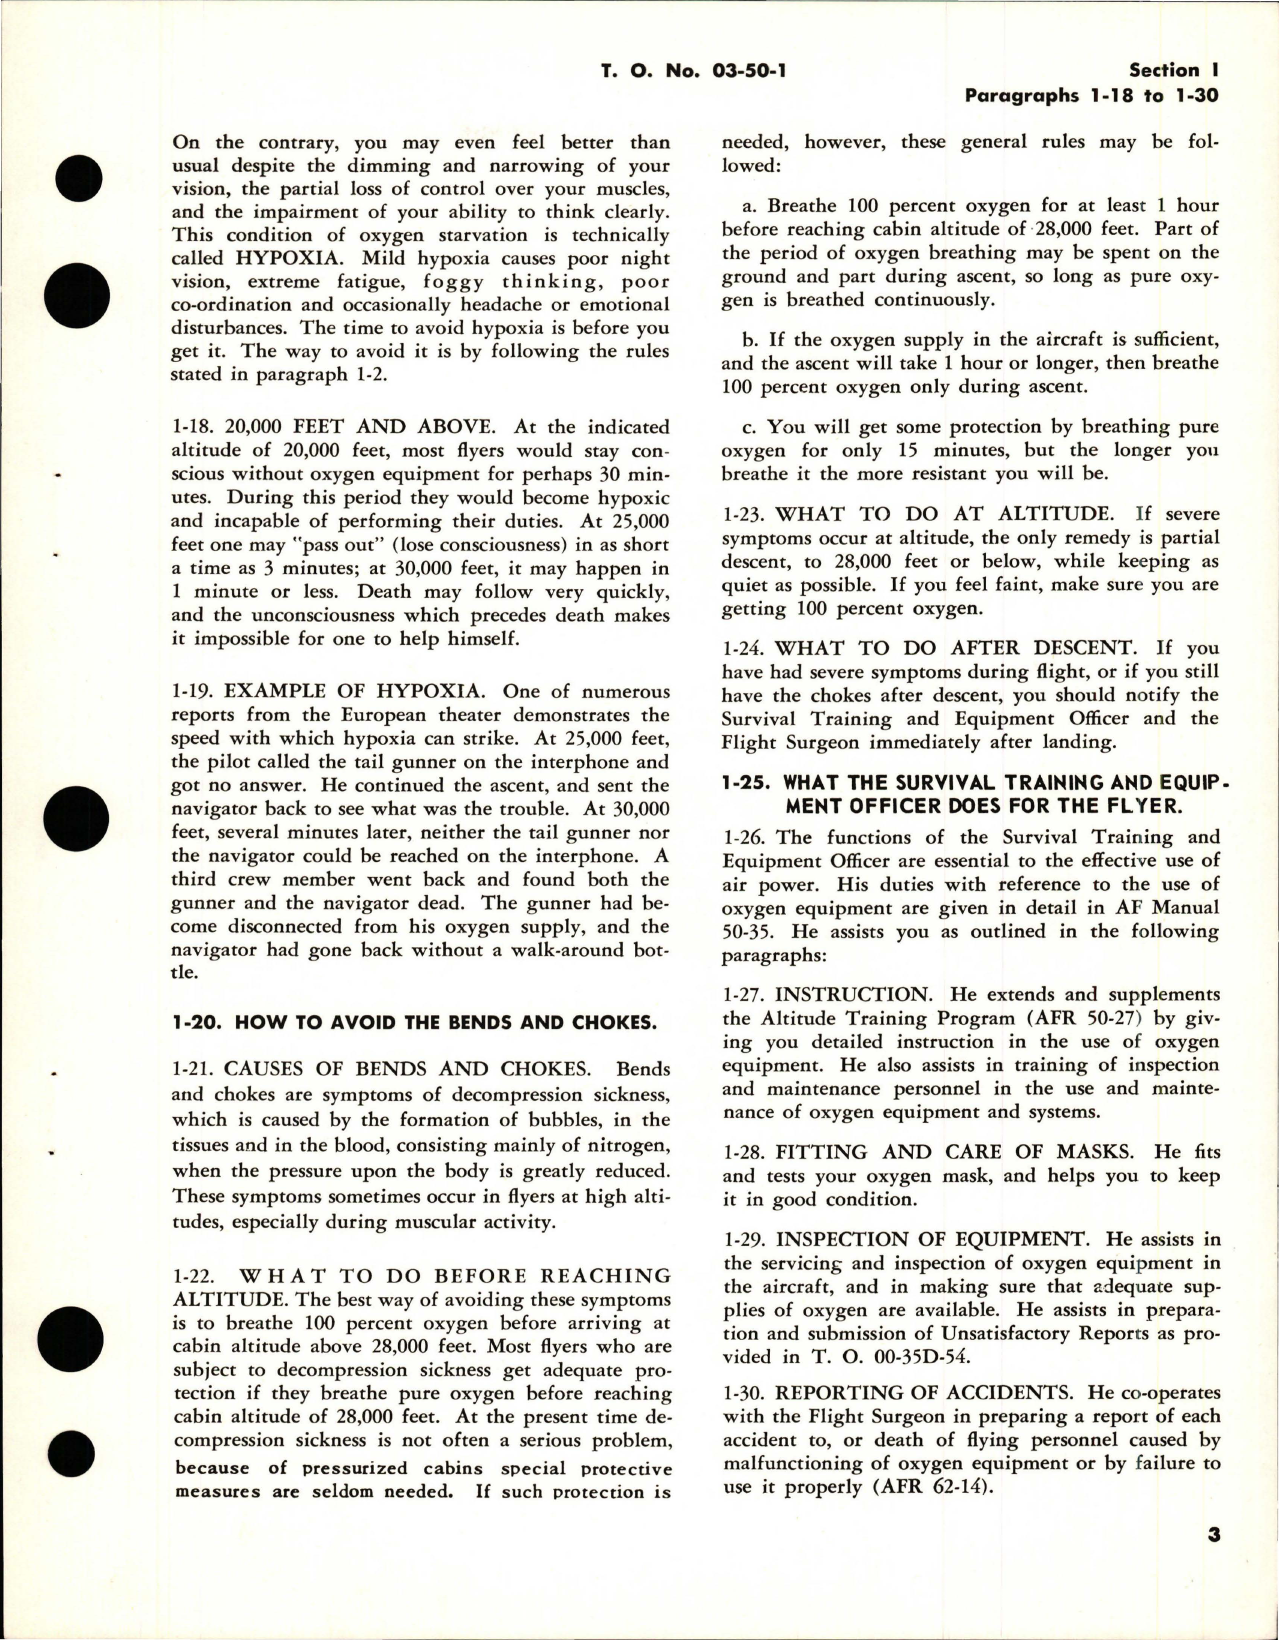 Sample page 9 from AirCorps Library document: Maintenance Instructions for Oxygen Equipment